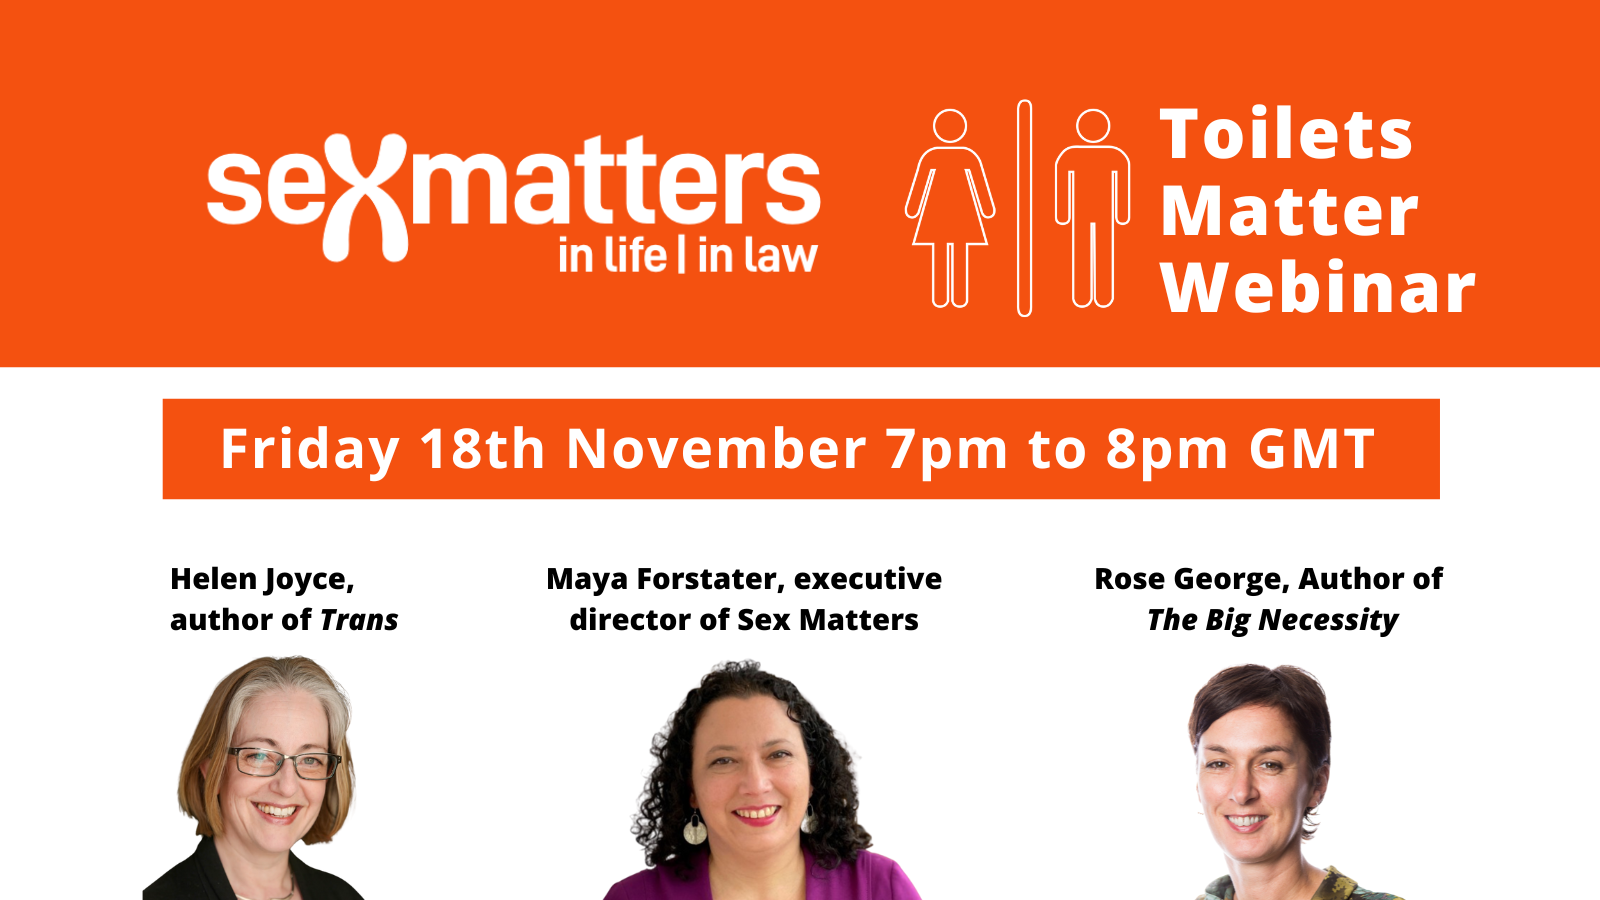 Toilets Matter: a Sex Matters webinar. Friday 18th November, 7pm to 8pm